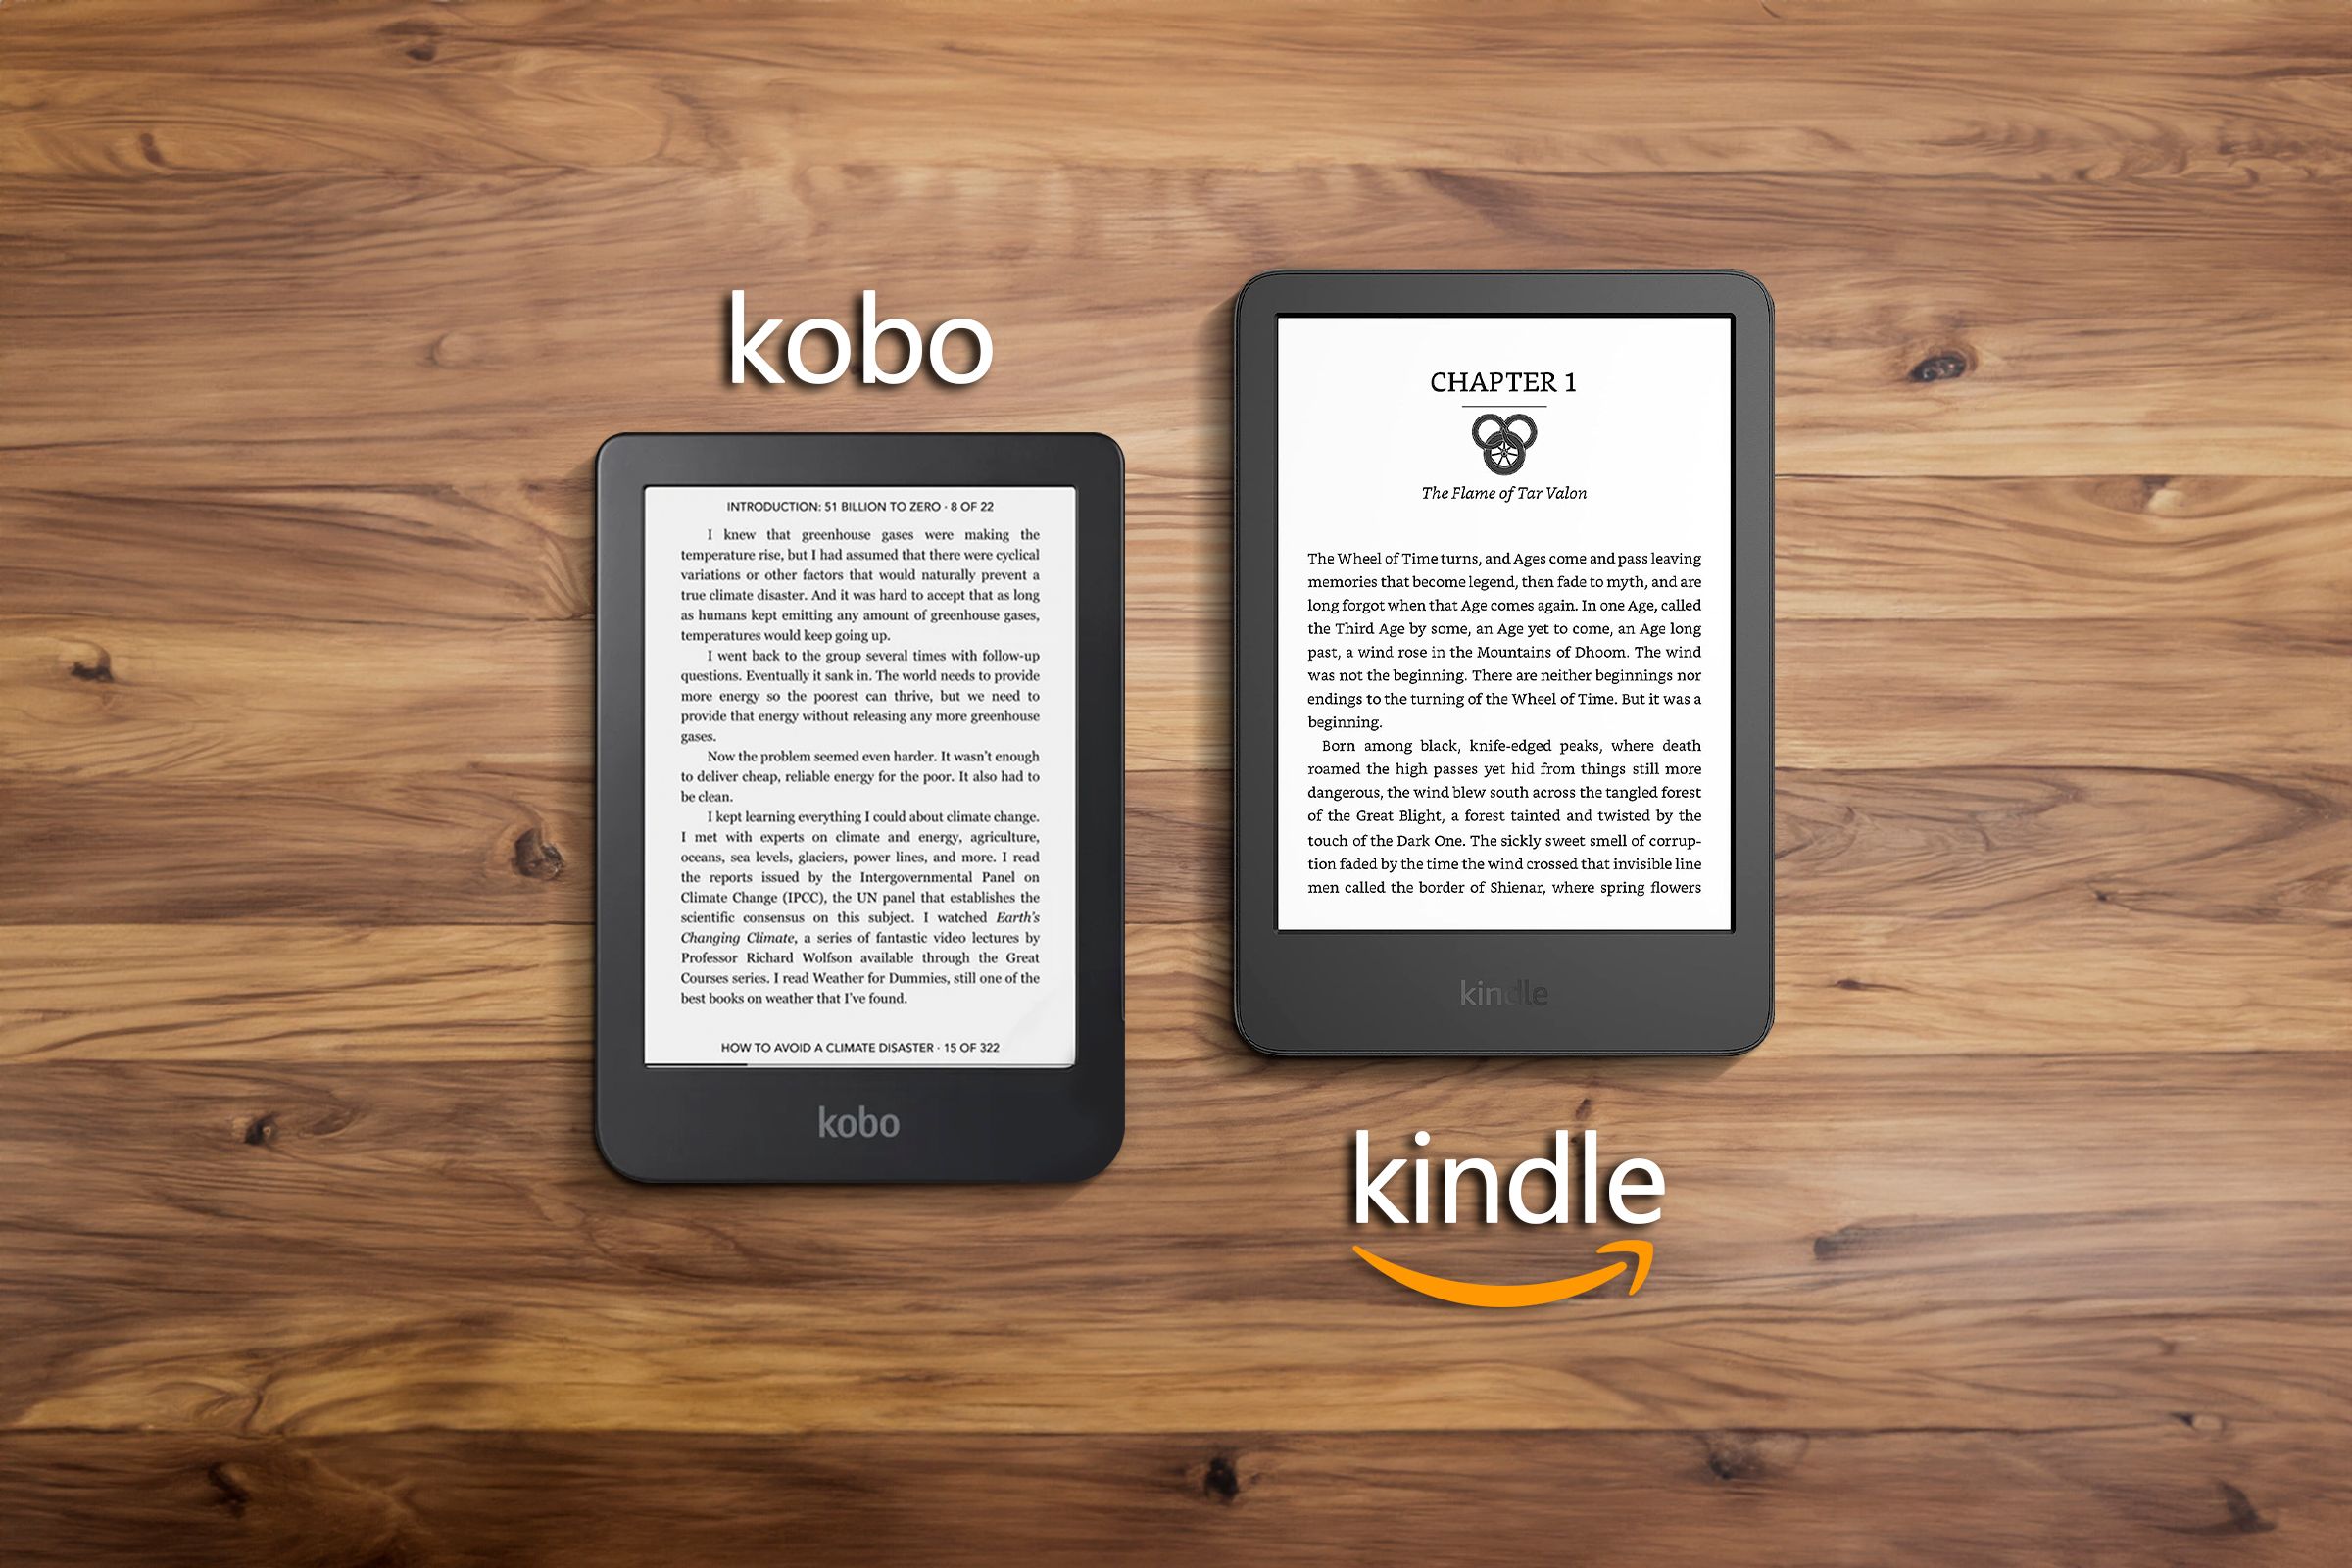 A kobo on the left side and a kindle on the right side under a wooden table.